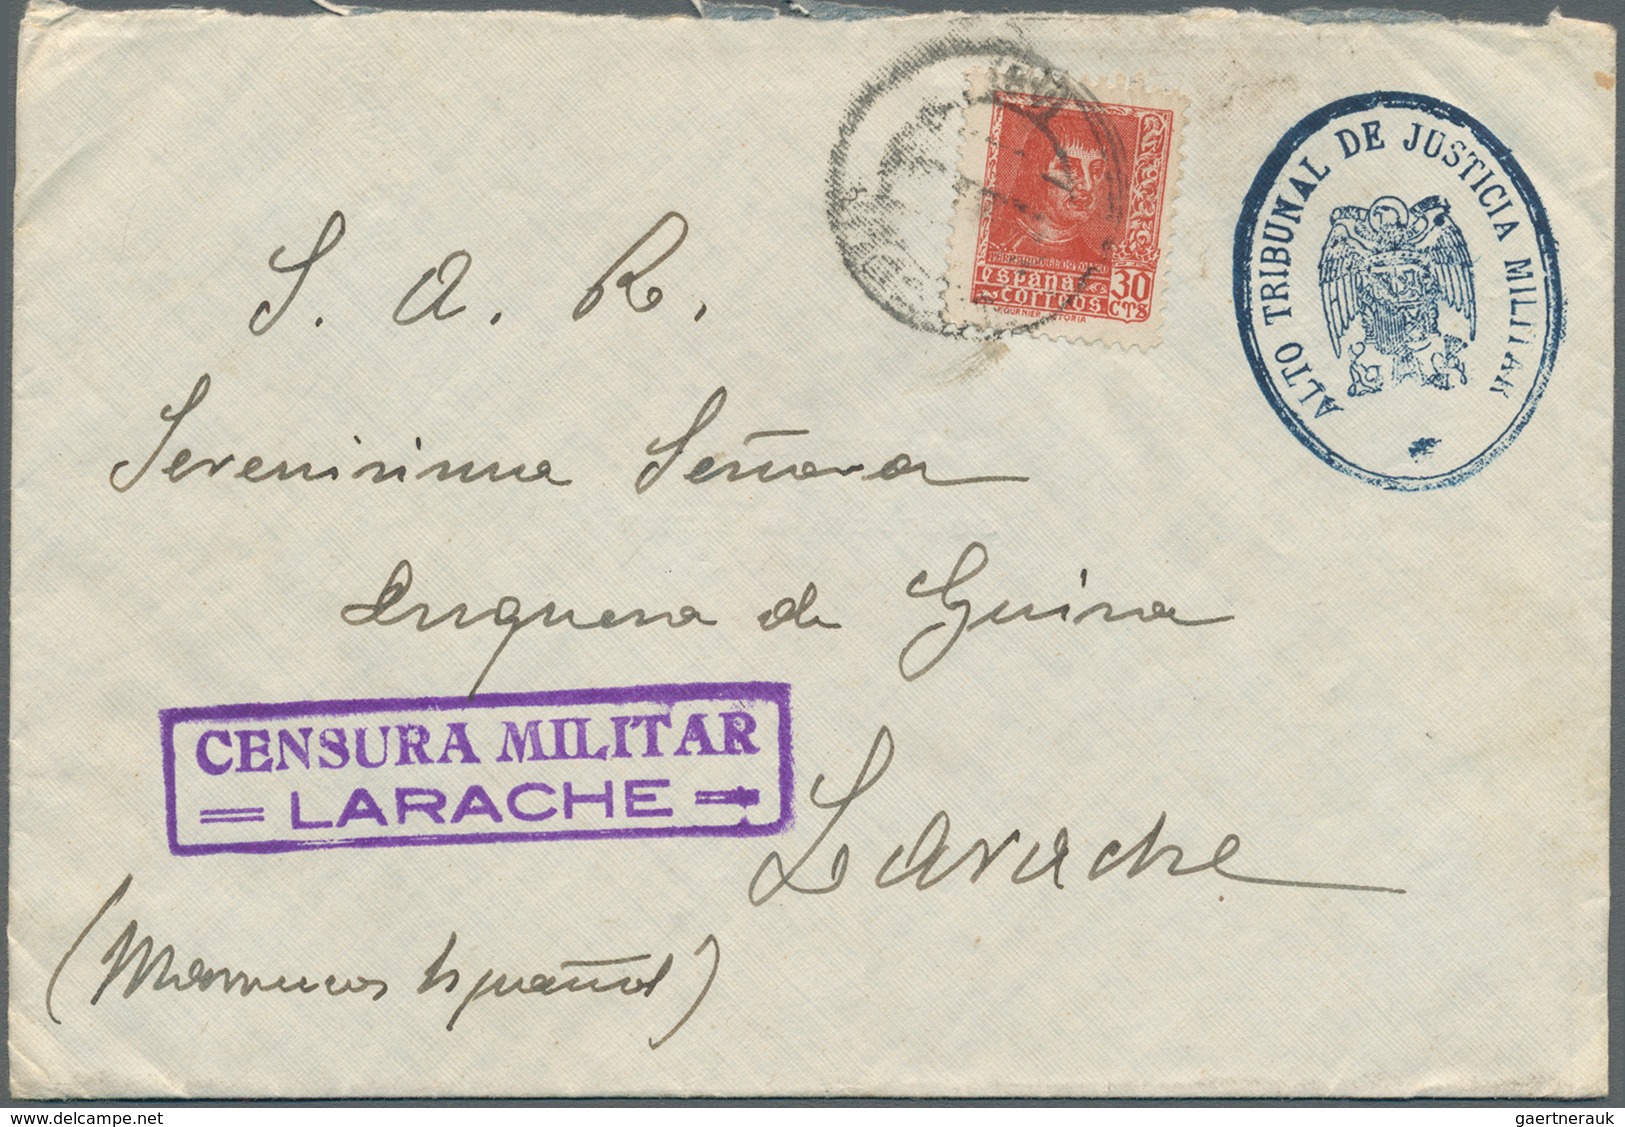 Spanien: 1843/1944: 29 envelopes, picture postcards and postal stationeries including censored mail,